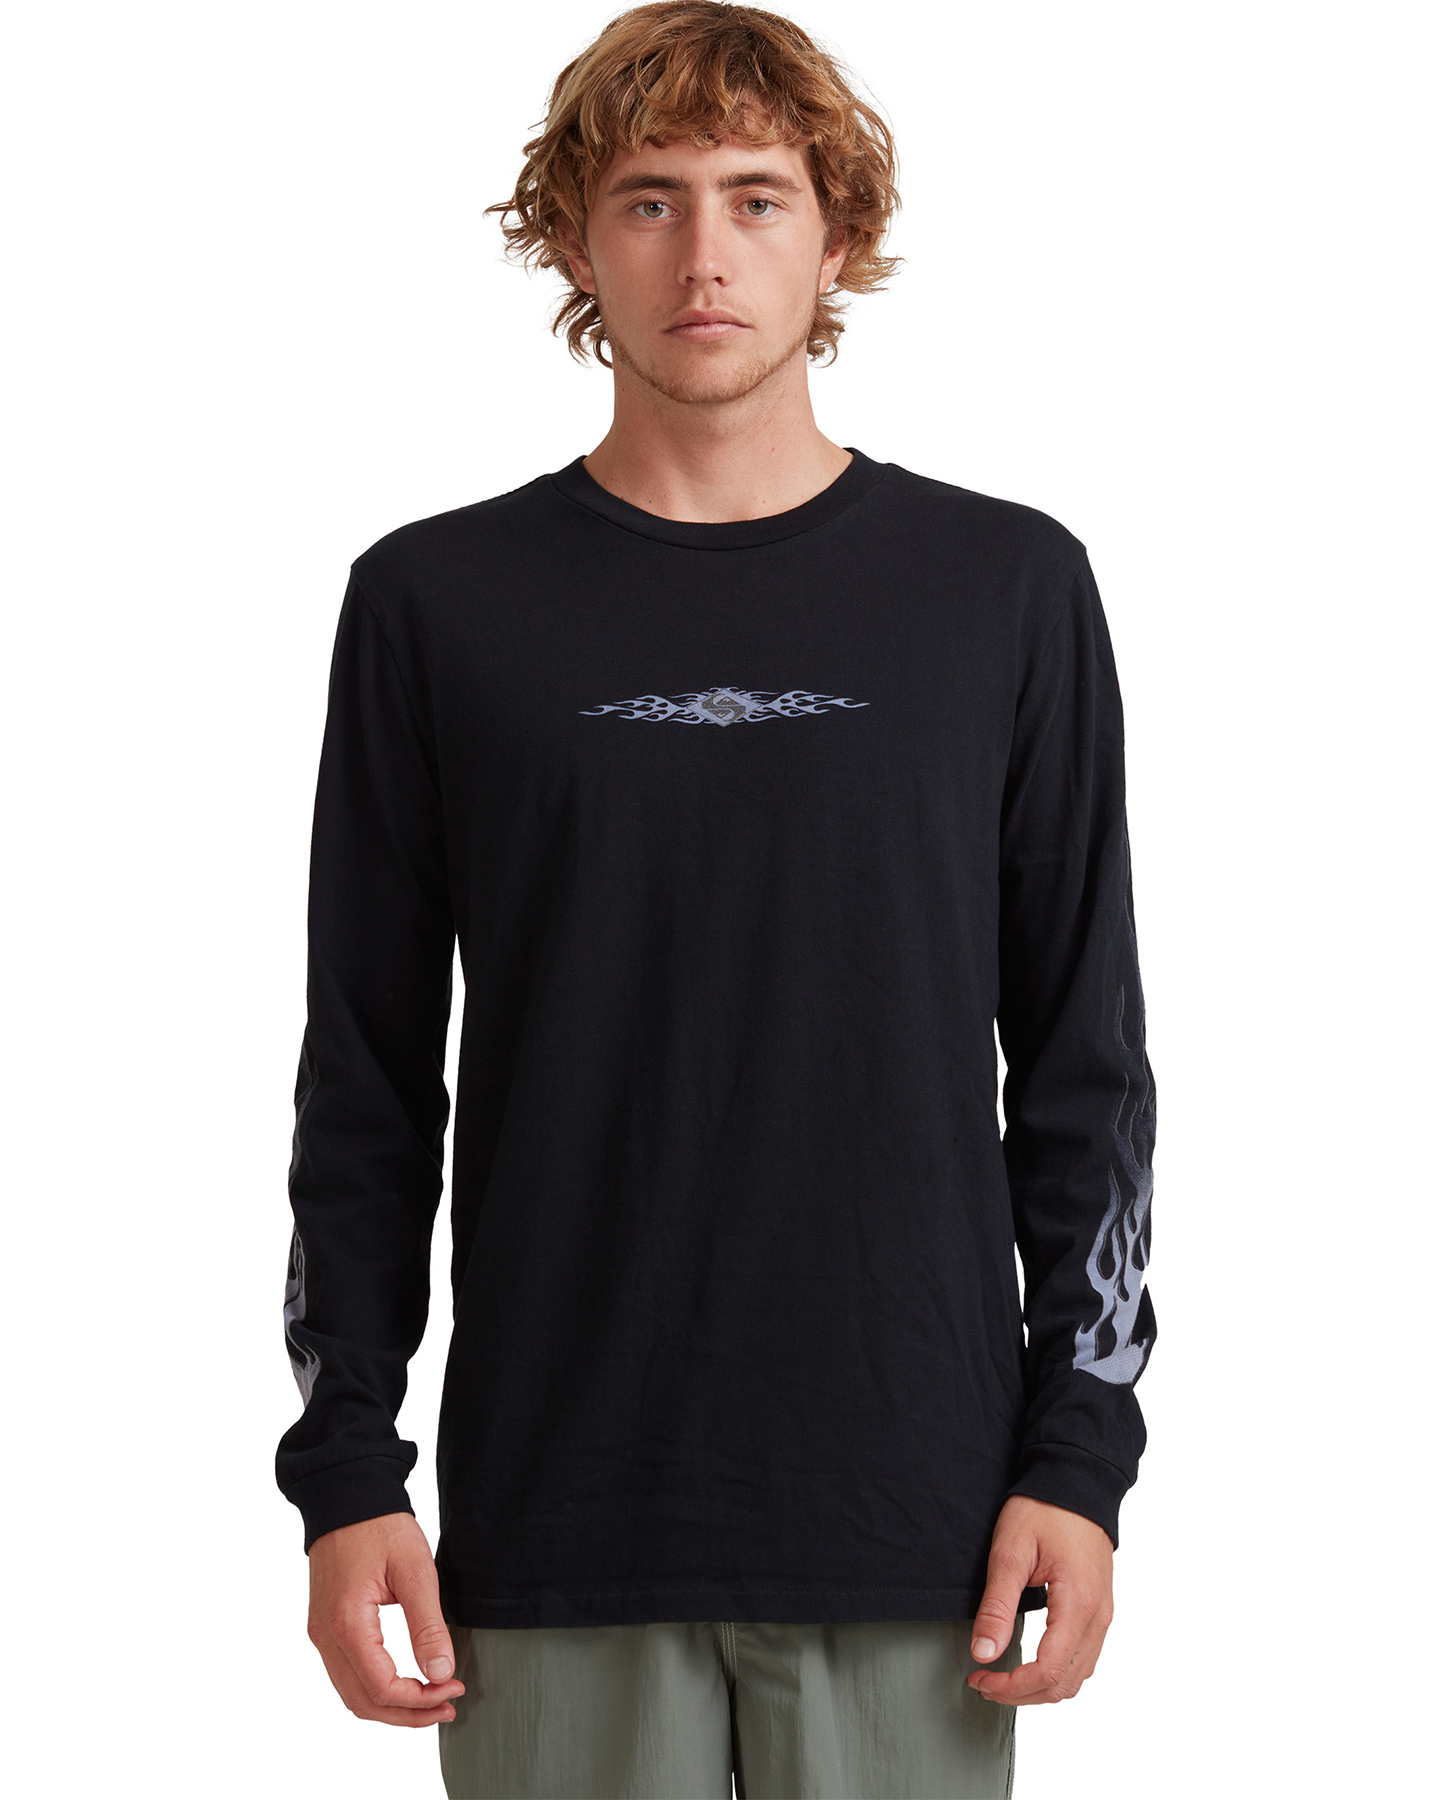 Quiksilver Mens In Flames Long Sleeve T-Shirt - Black | SurfStitch